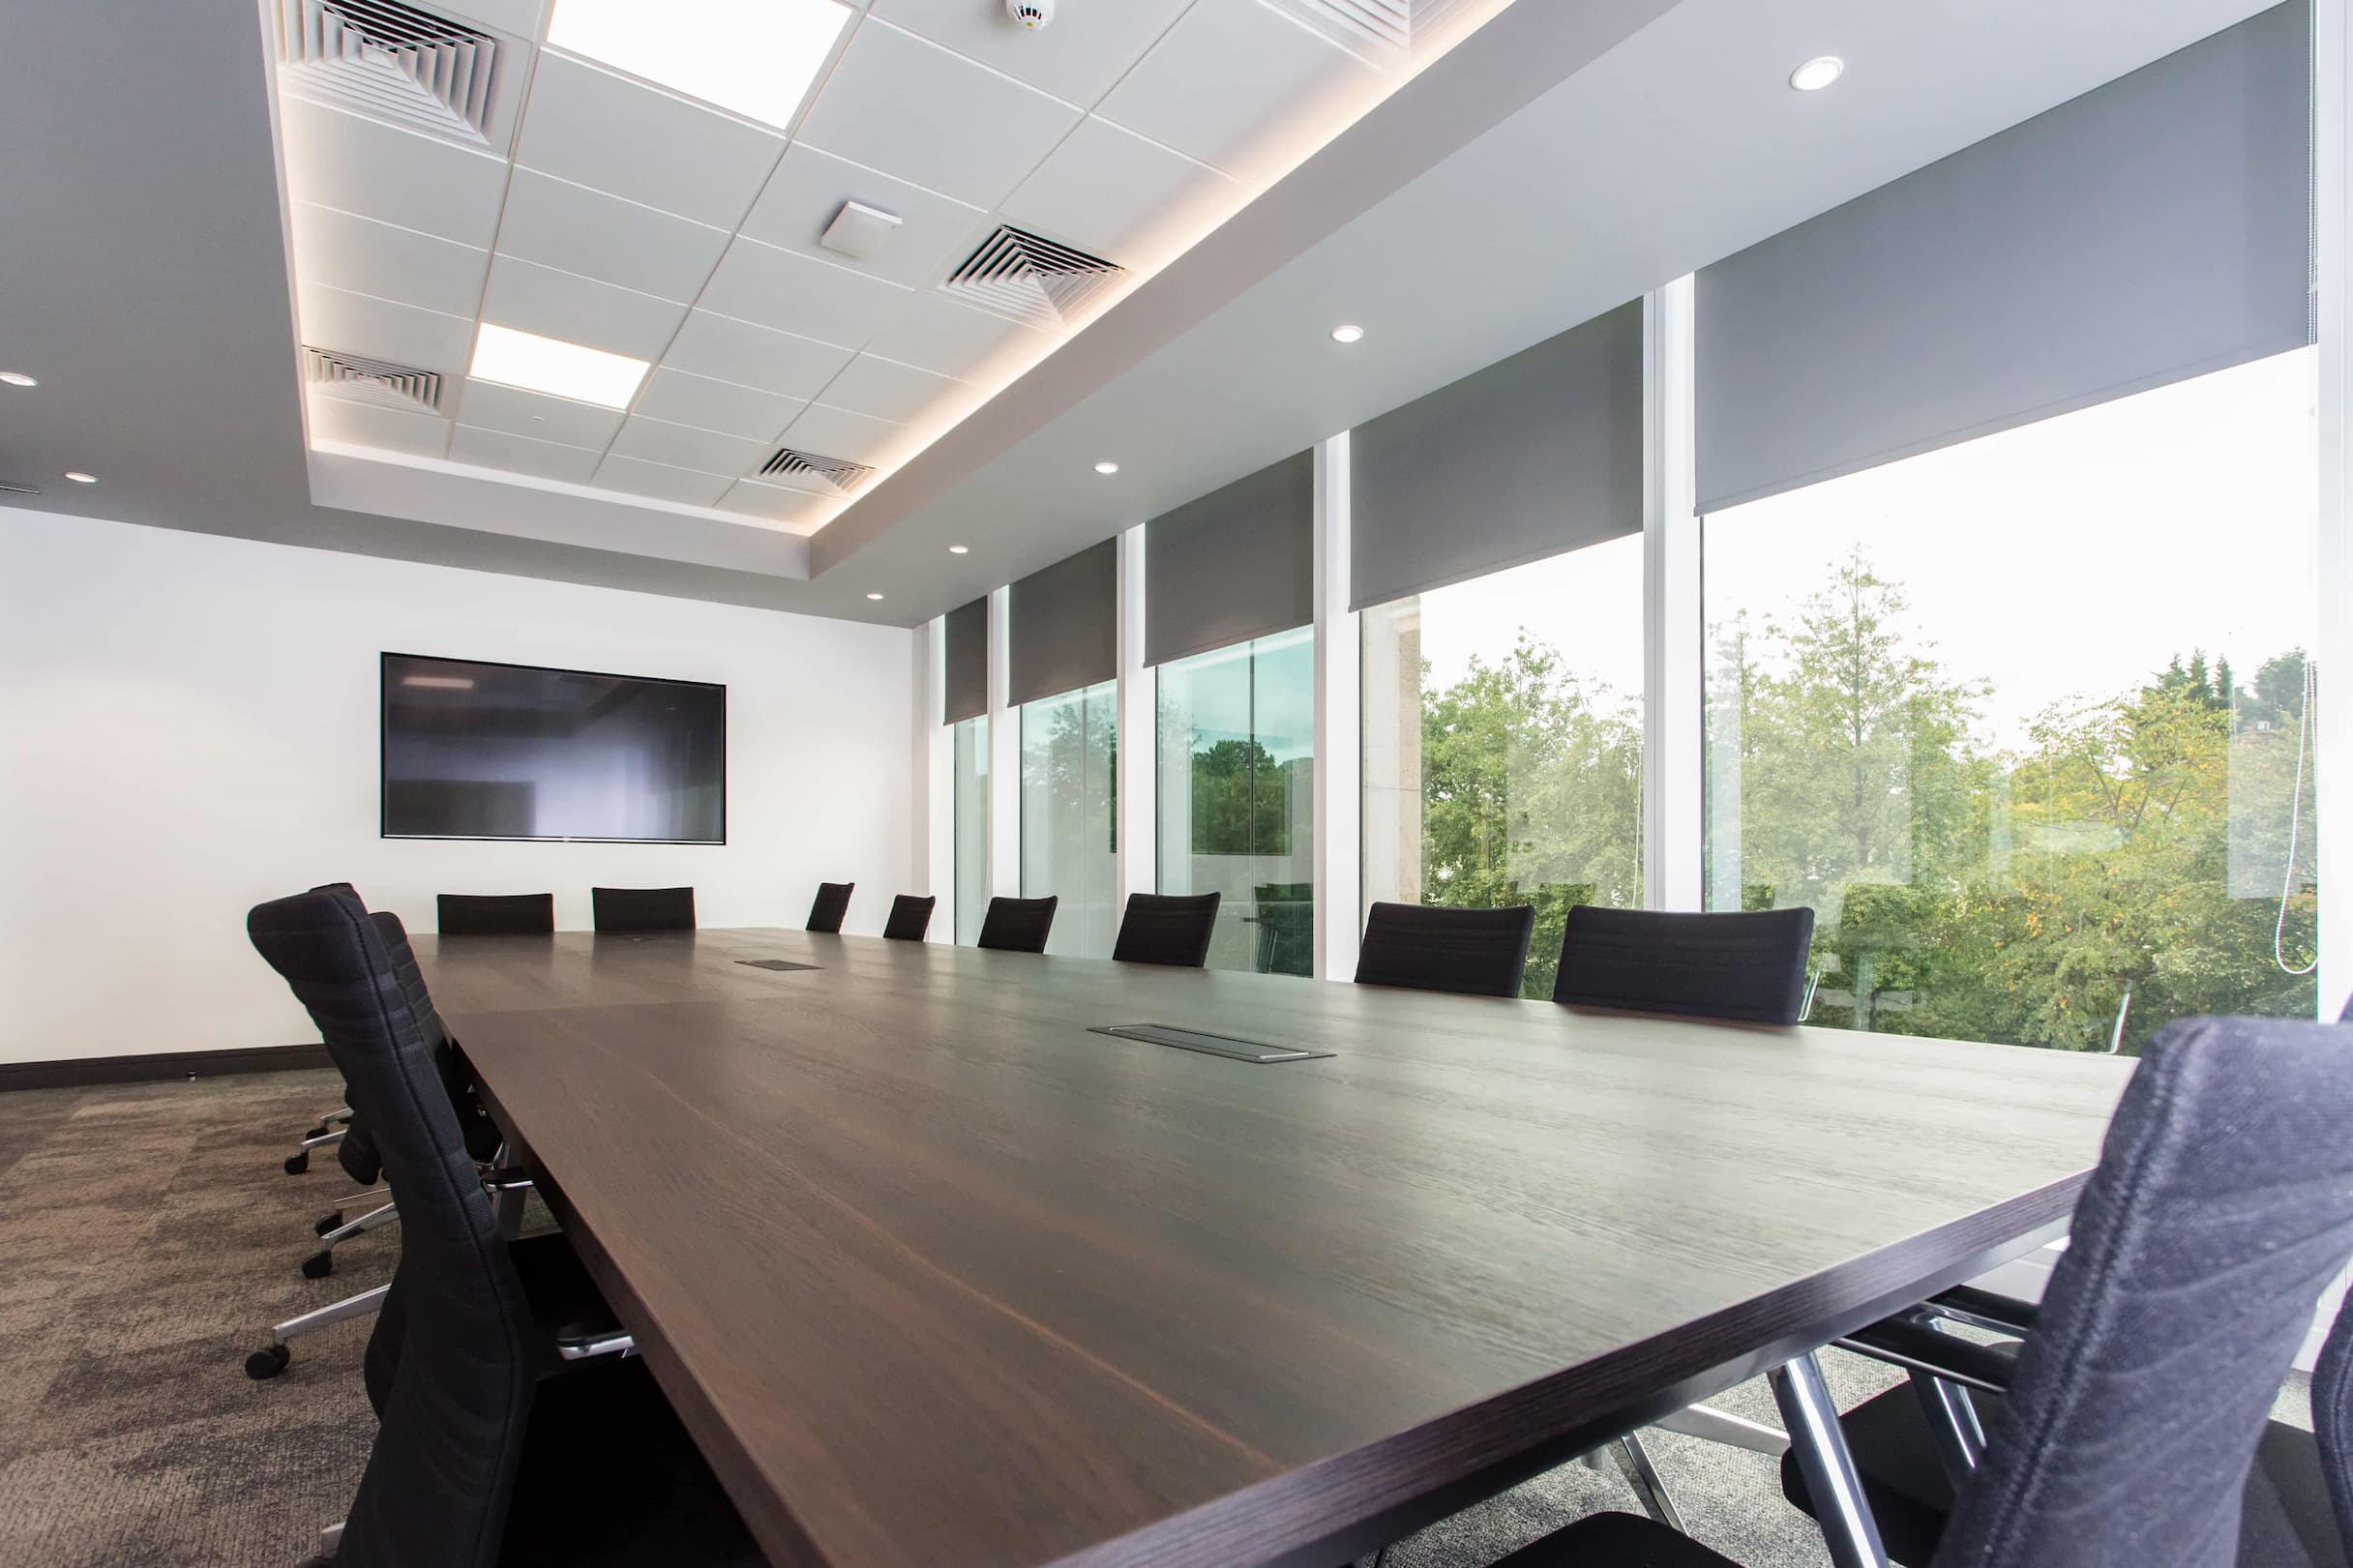 A meeting room with a dark wooden table, black chairs and windows on the right wall.